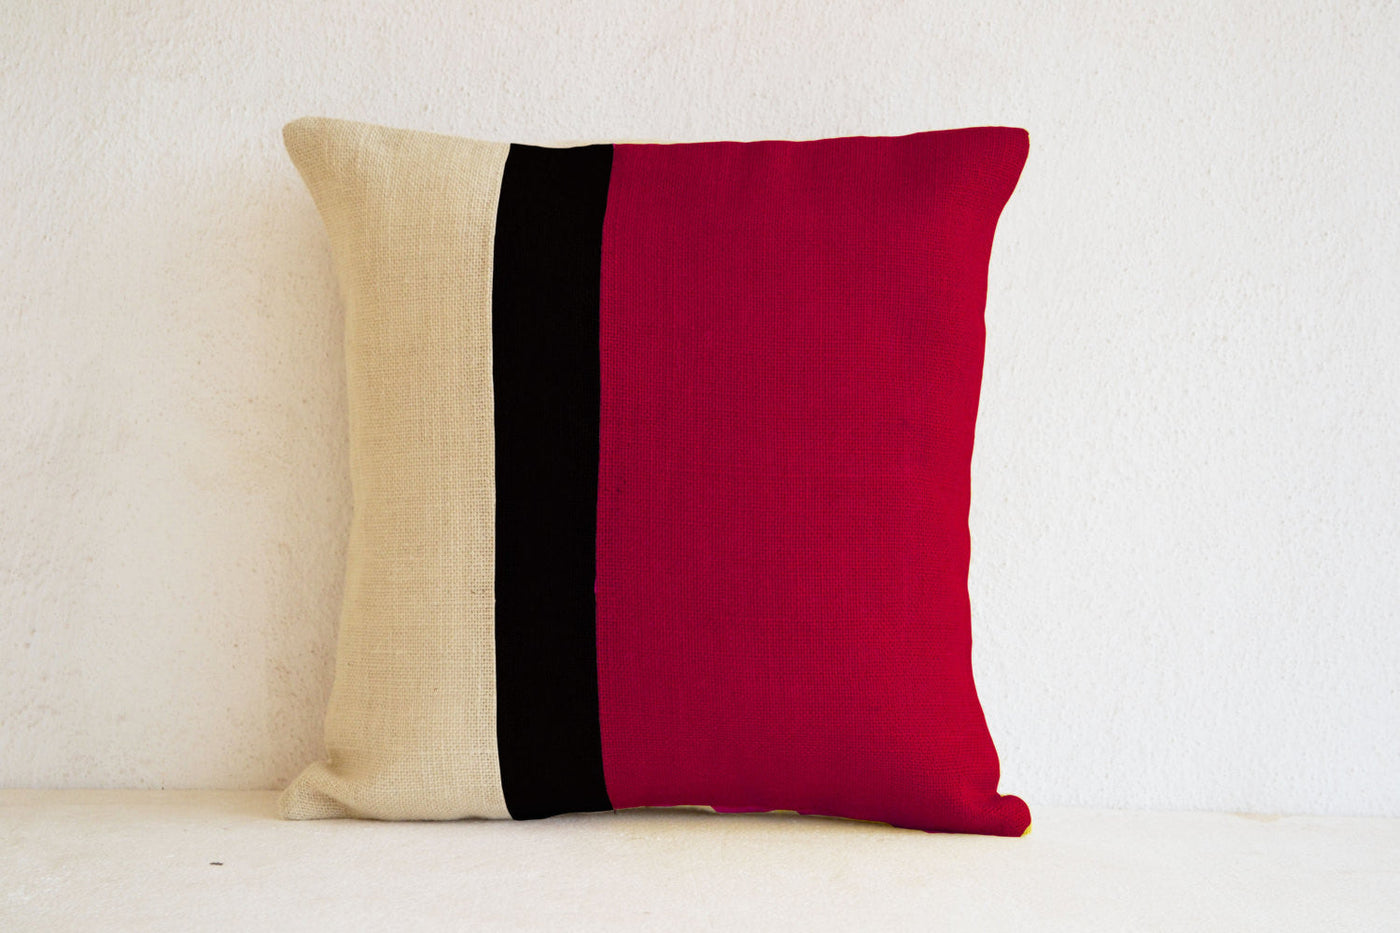 Red Pillow - Burlap Pillow color block - Red Decorative cushion cover- Spring Throw pillow gift 16X16 - Red Euro Sham by Amore Beauté